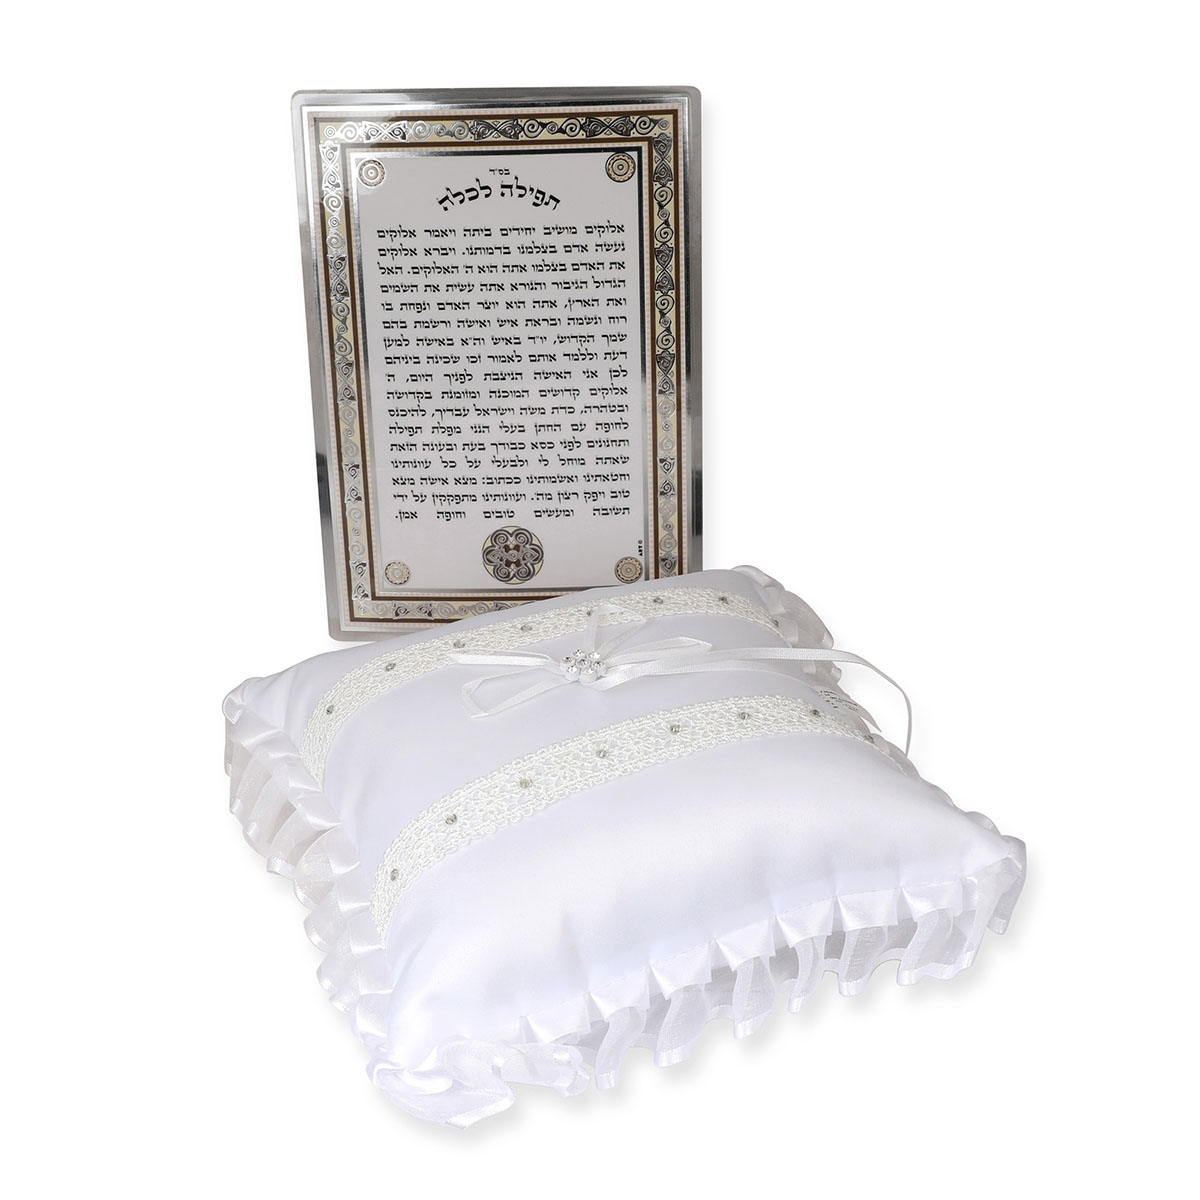 Deluxe Bridal Blessing & Ring Cushion Gift Set - 1